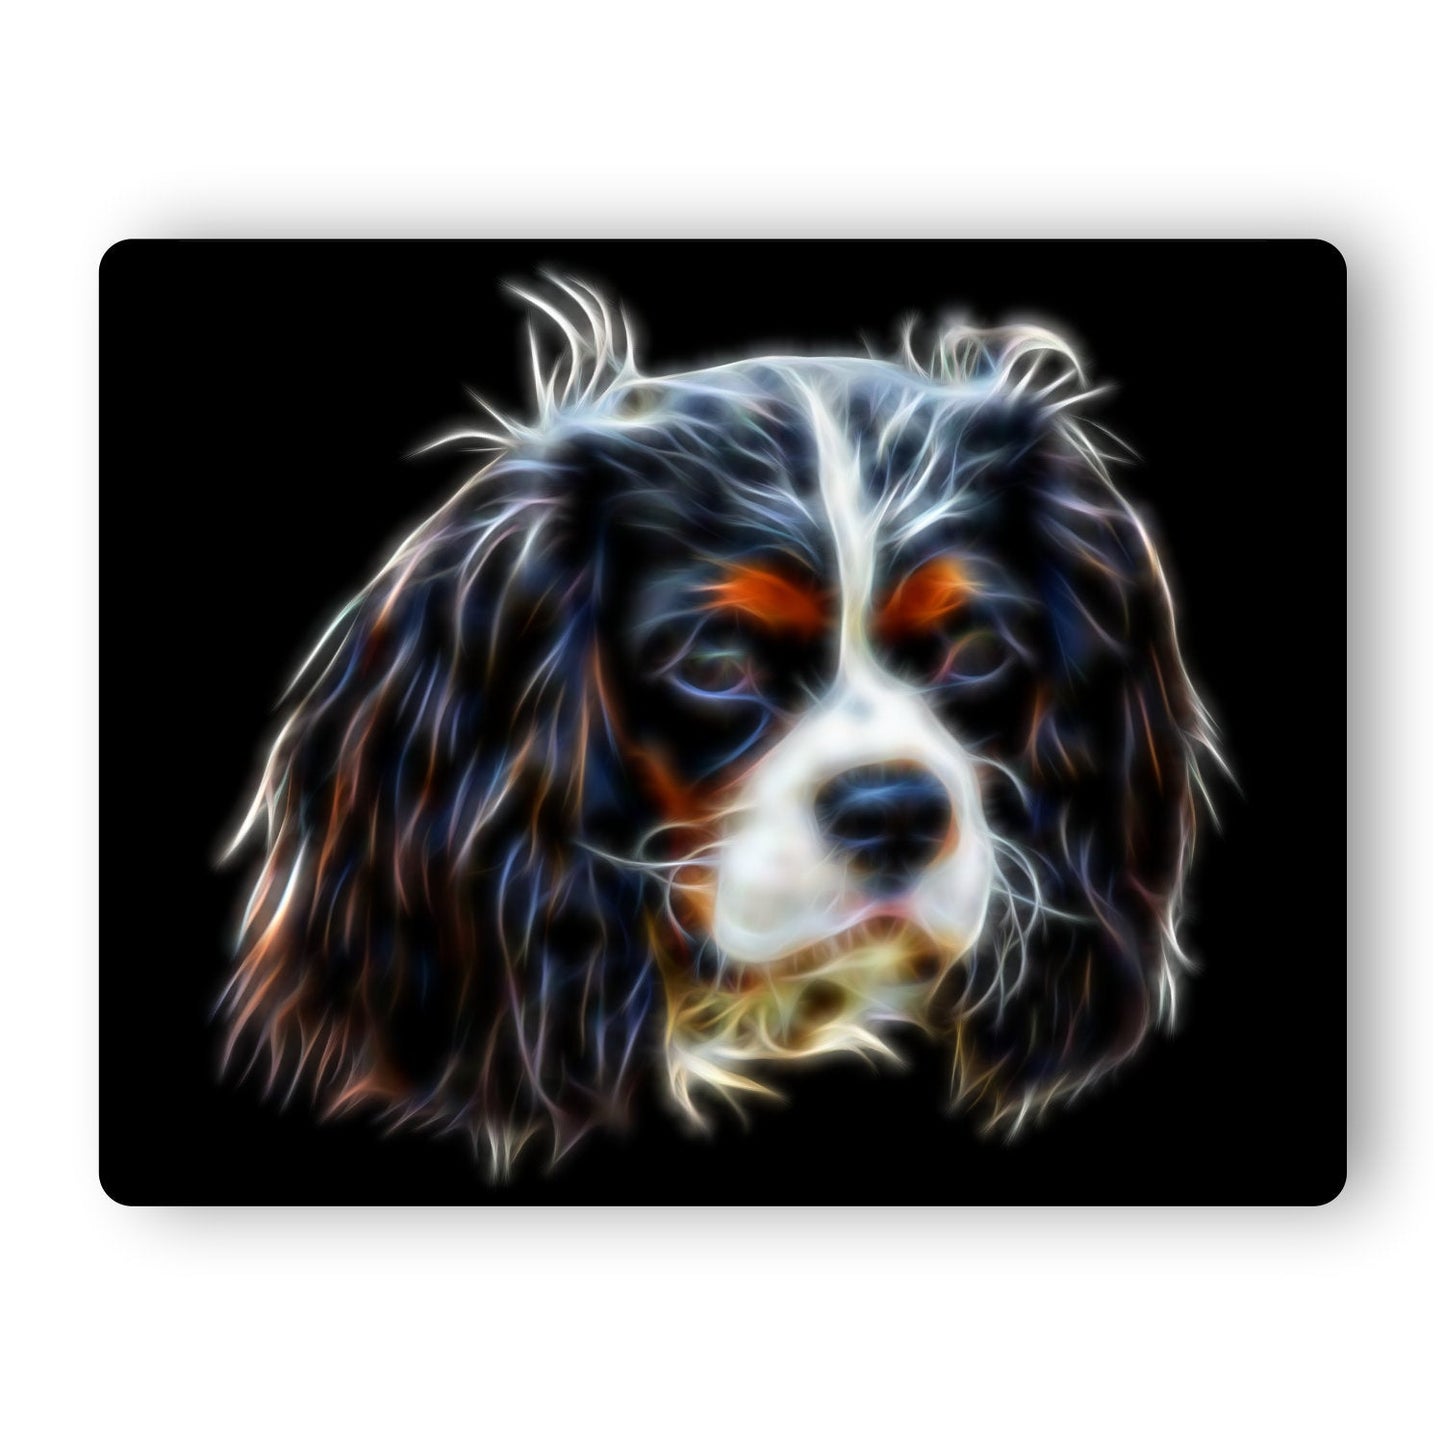 Tri Coloured King Charles Spaniel Metal Wall Plaque. Also available as Mouse Pad, Keychain or Coaster.